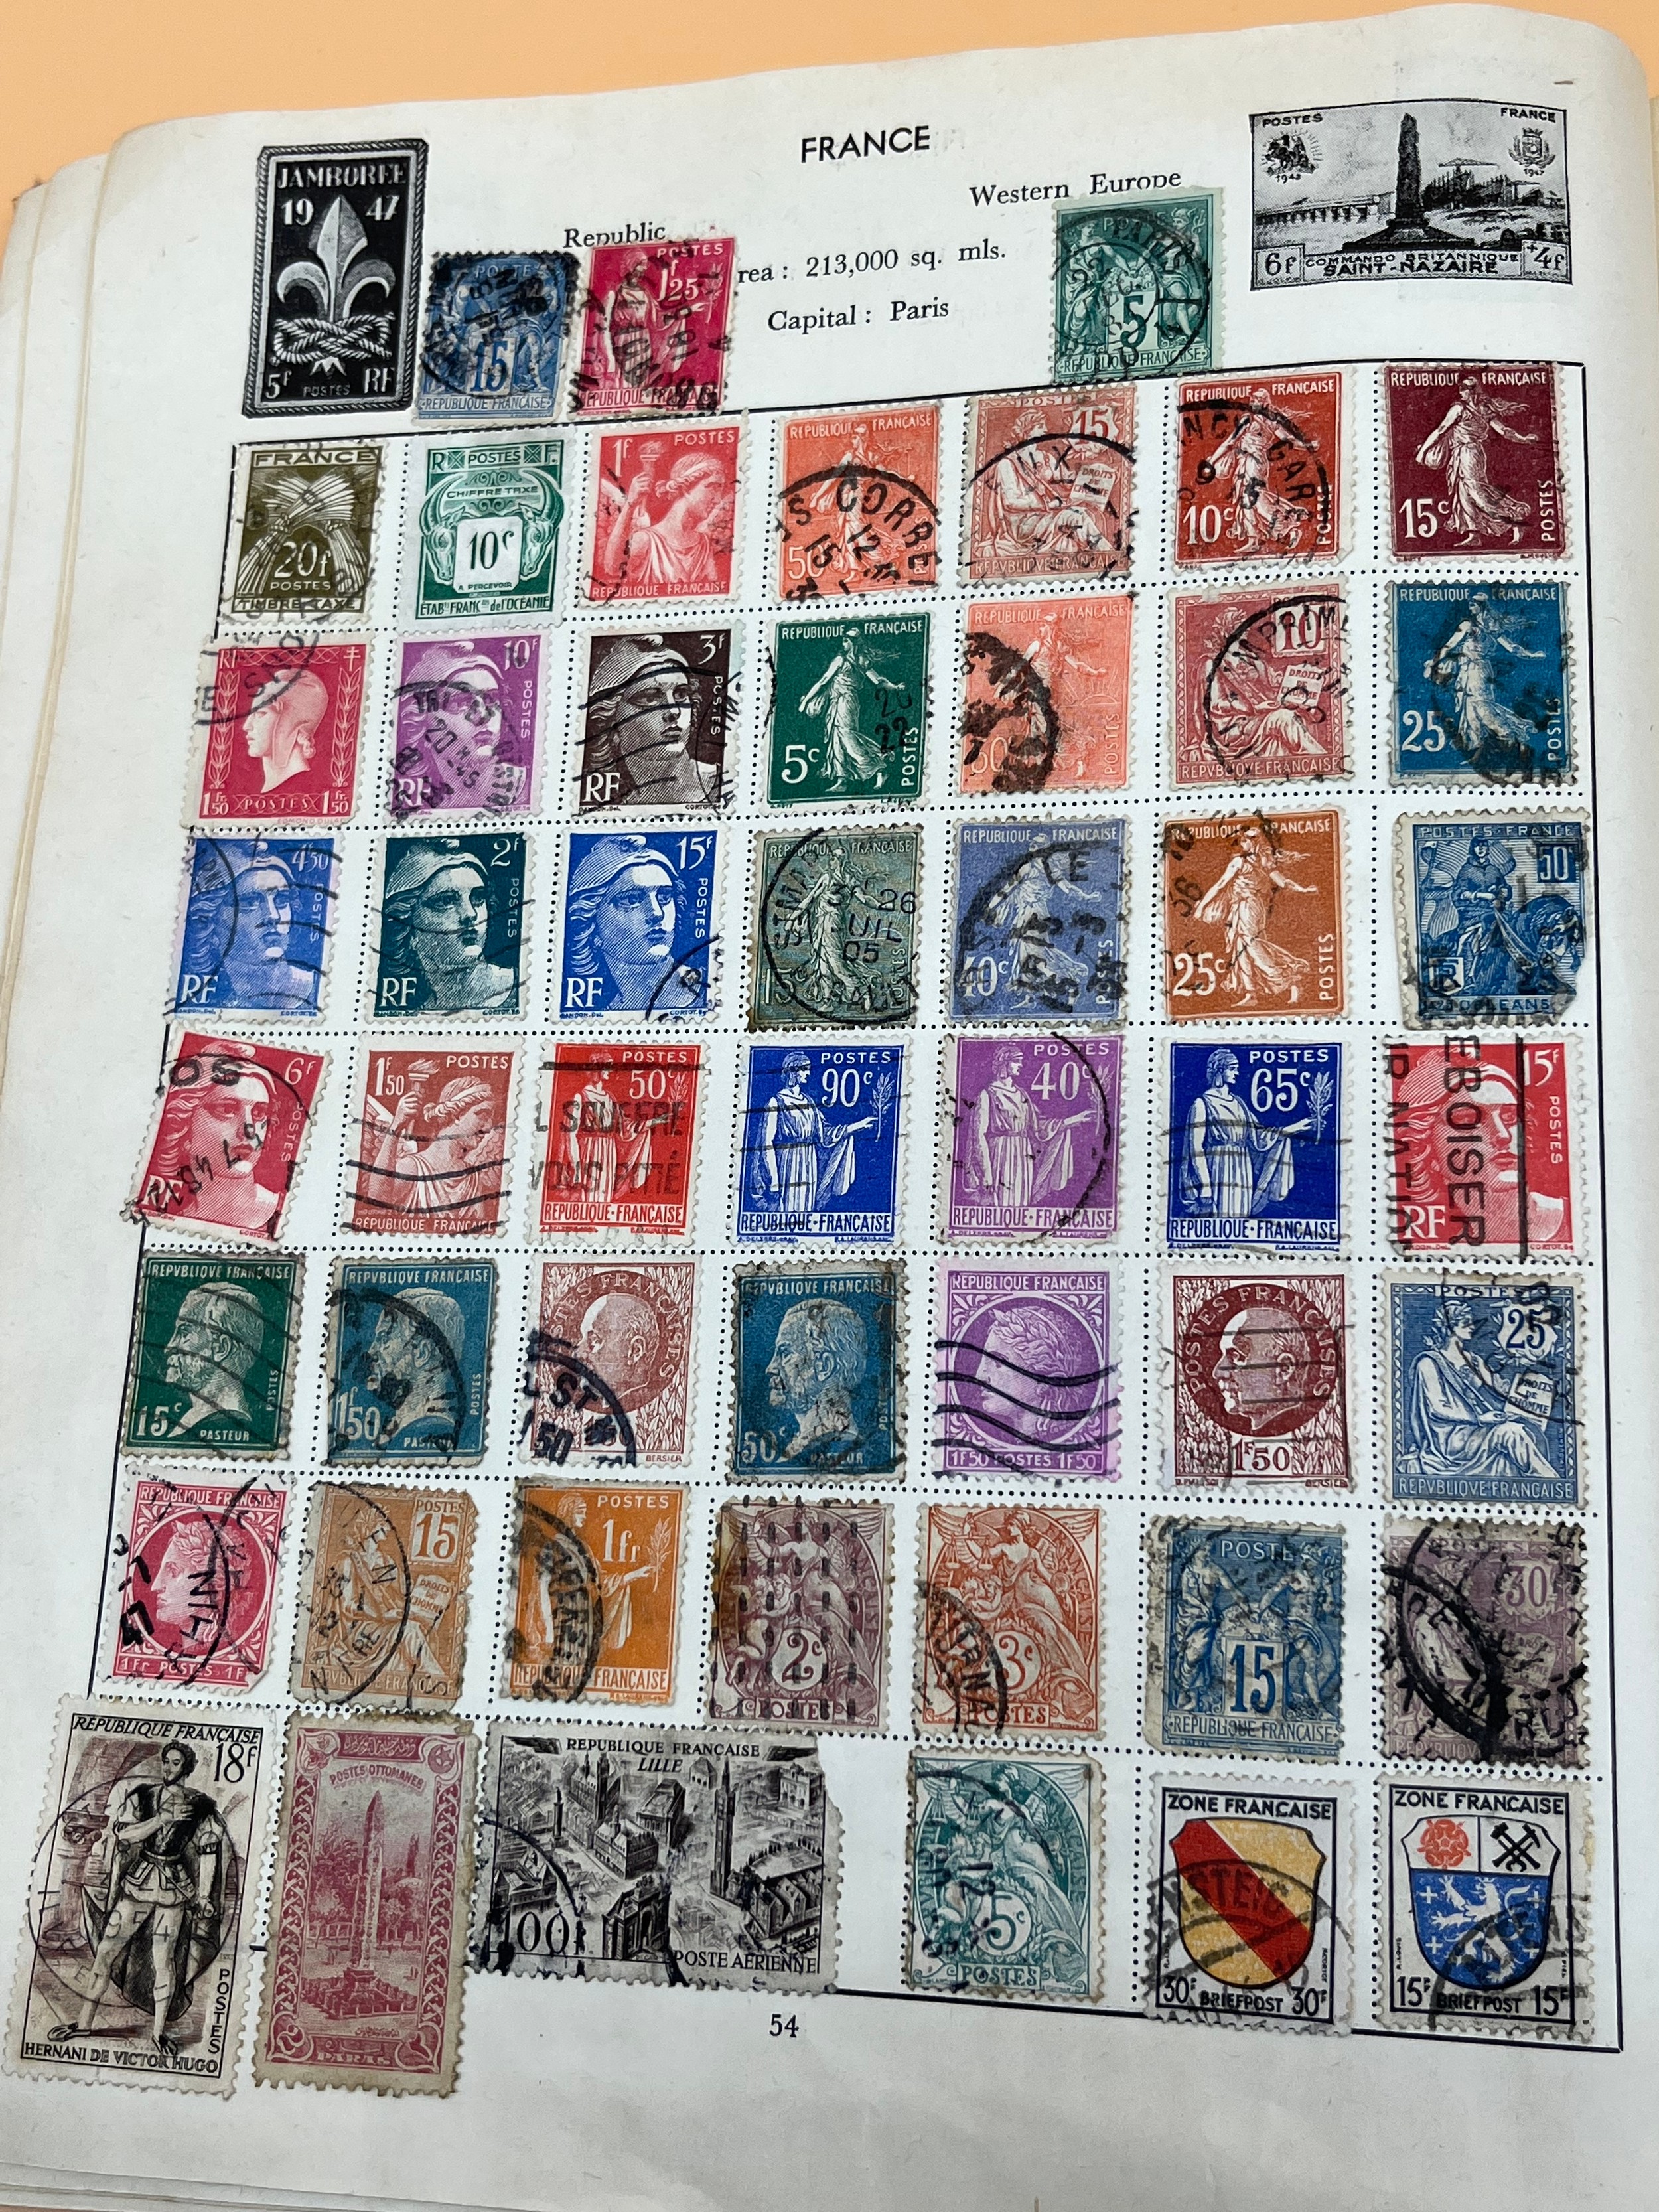 Vintage stamp album containing a collection of world stamps - Image 12 of 22